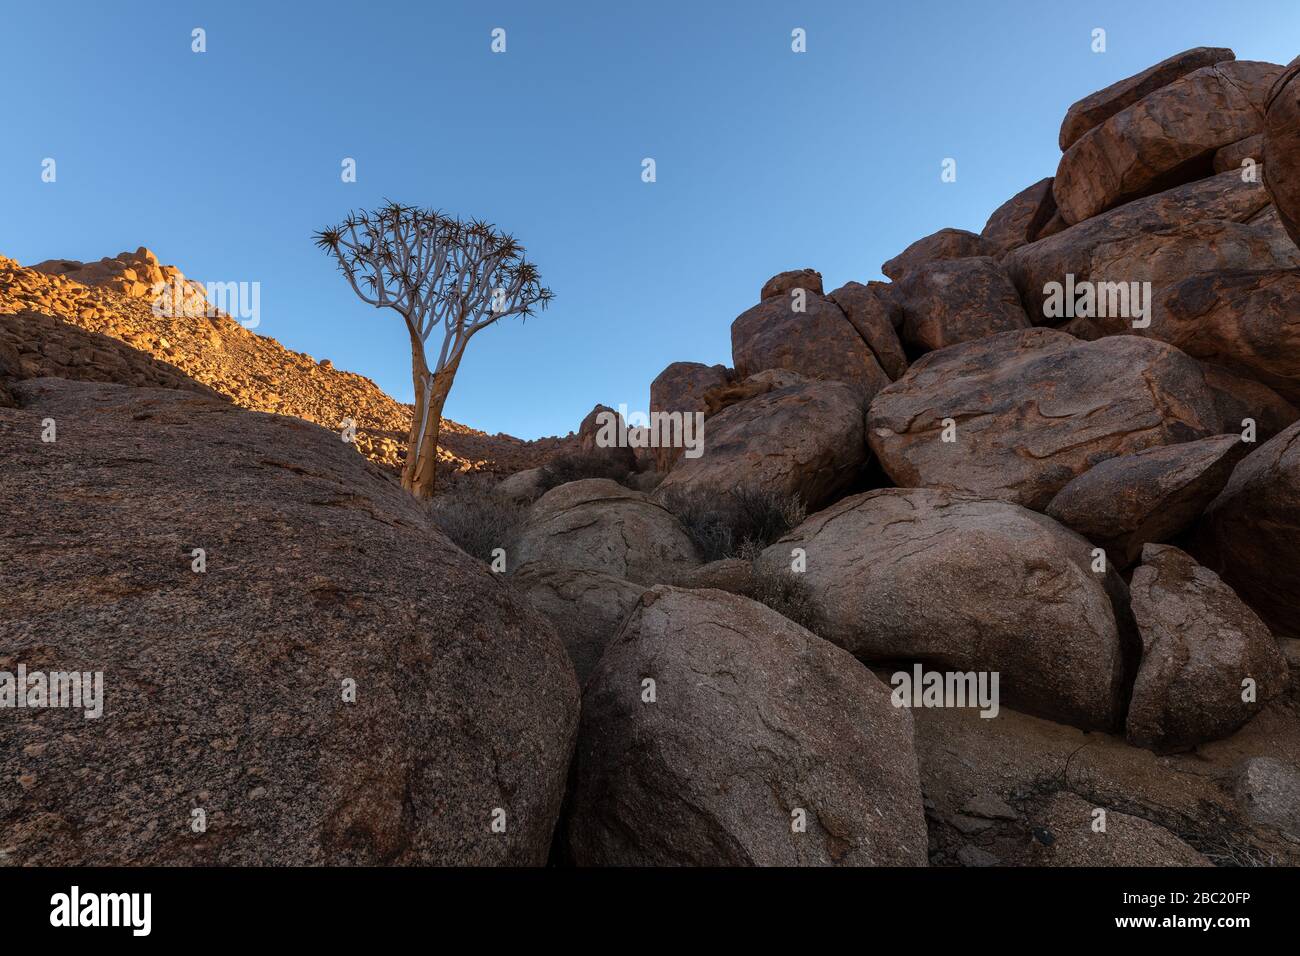 A beautiful arid mountain landscape at sunset, with fascinating rock formations in the foreground and a beautiful Quiver Tree in the background, taken Stock Photo